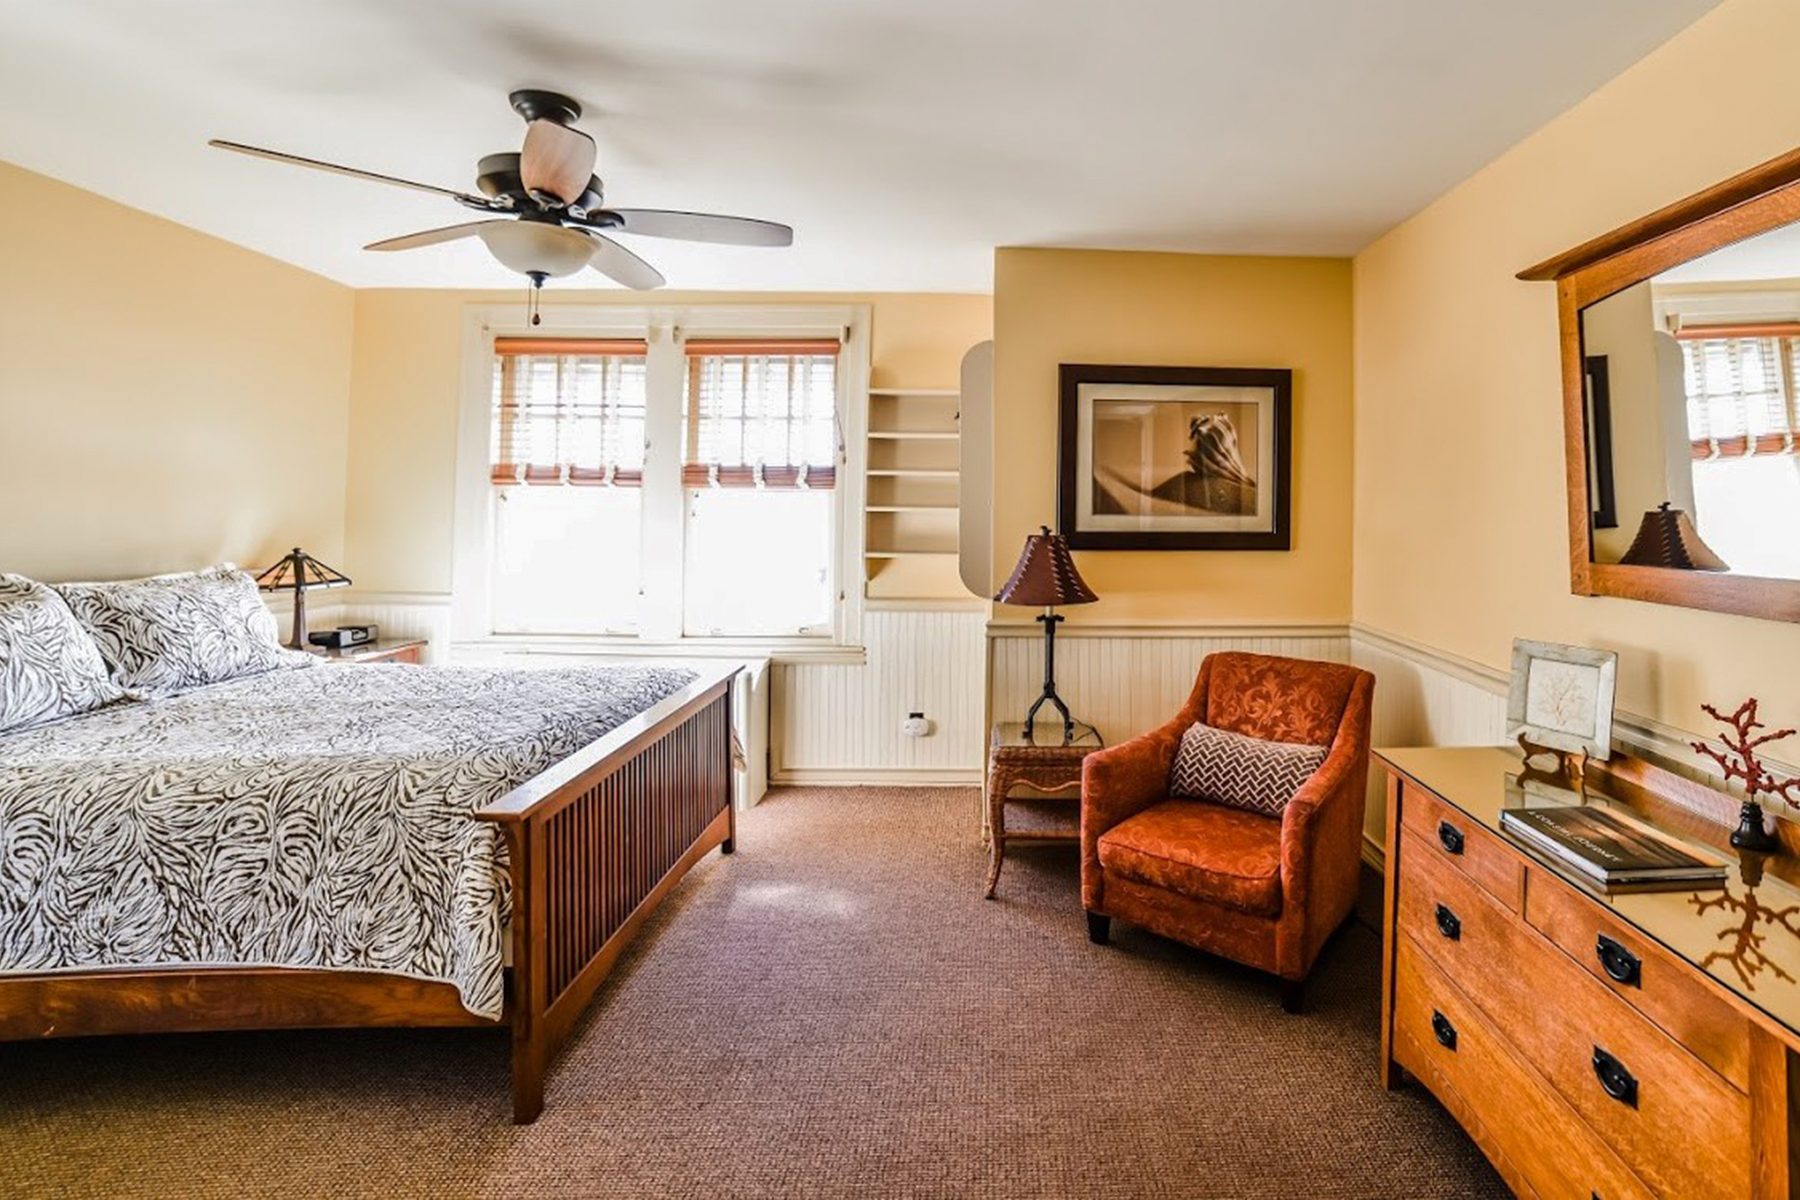 <h3 class="">Cape May, New Jersey</h3> <p class=""><strong>Best for: </strong>Romantic views of the Atlantic Ocean</p> <p>This seaside Swiss chalet–style retreat along the southernmost point of the Jersey Shore offers guests unrivaled views of the ocean just steps away from the beach. The grand salon, other public areas and eight rooms and suites are decorated with mission oak furnishings from the Stickley collection, art glass lanterns, mica lamps and soothing natural tones. And most accommodations have ocean views and come with queen- or king-size pillow-top mattresses, private bathrooms, silky microfiber robes and essential-oil bath products. You'll also have access to a concierge, bicycles, an outdoor shower and complimentary use of towels and beach chairs while at the beach.</p> <p>During your stay at <a href="https://www.tripadvisor.com/Hotel_Review-g46341-d79428-Reviews-Rhythm_of_the_Sea-Cape_May_Cape_May_County_New_Jersey.html" rel="noopener">Rhythm of the Sea</a>, you'll get to enjoy your morning coffee with ocean views and a hot, chef-prepared breakfast (served to your room), which alternates between savory baked-egg dishes and sweet offerings such as a French-toasted brioche with a fruit compote. The property's chef-owner has an impressive culinary pedigree, including stints at three-Michelin-star Le Moulin de Mougins in France, so you might want to <a href="https://www.rd.com/list/valentines-day-ideas/">plan a visit during Valentine's Day weekend</a>, when "Chef Lu" prepares his special chef's dinner.</p> <p><strong>Pros:</strong></p> <ul> <li class="">Located directly across from the beach, with complimentary on-site parking</li> <li class="">A short walk along the promenade to the Victorian Village and Washington Street Walking Mall</li> <li class="">Chef-owned property</li> </ul> <p><strong>Cons:</strong></p> <ul> <li class="">A two- to three-night minimum stay is typically required from Memorial Day through the end of September</li> <li class="">The property is geared mostly toward adults, and only one accommodation (the Cape Carriage House) is available for children under 12 and pets</li> </ul> <p class="listicle-page__cta-button-shop"><a class="shop-btn" href="https://www.tripadvisor.com/Hotel_Review-g46341-d79428-Reviews-Rhythm_of_the_Sea-Cape_May_Cape_May_County_New_Jersey.html">Book Now</a></p>